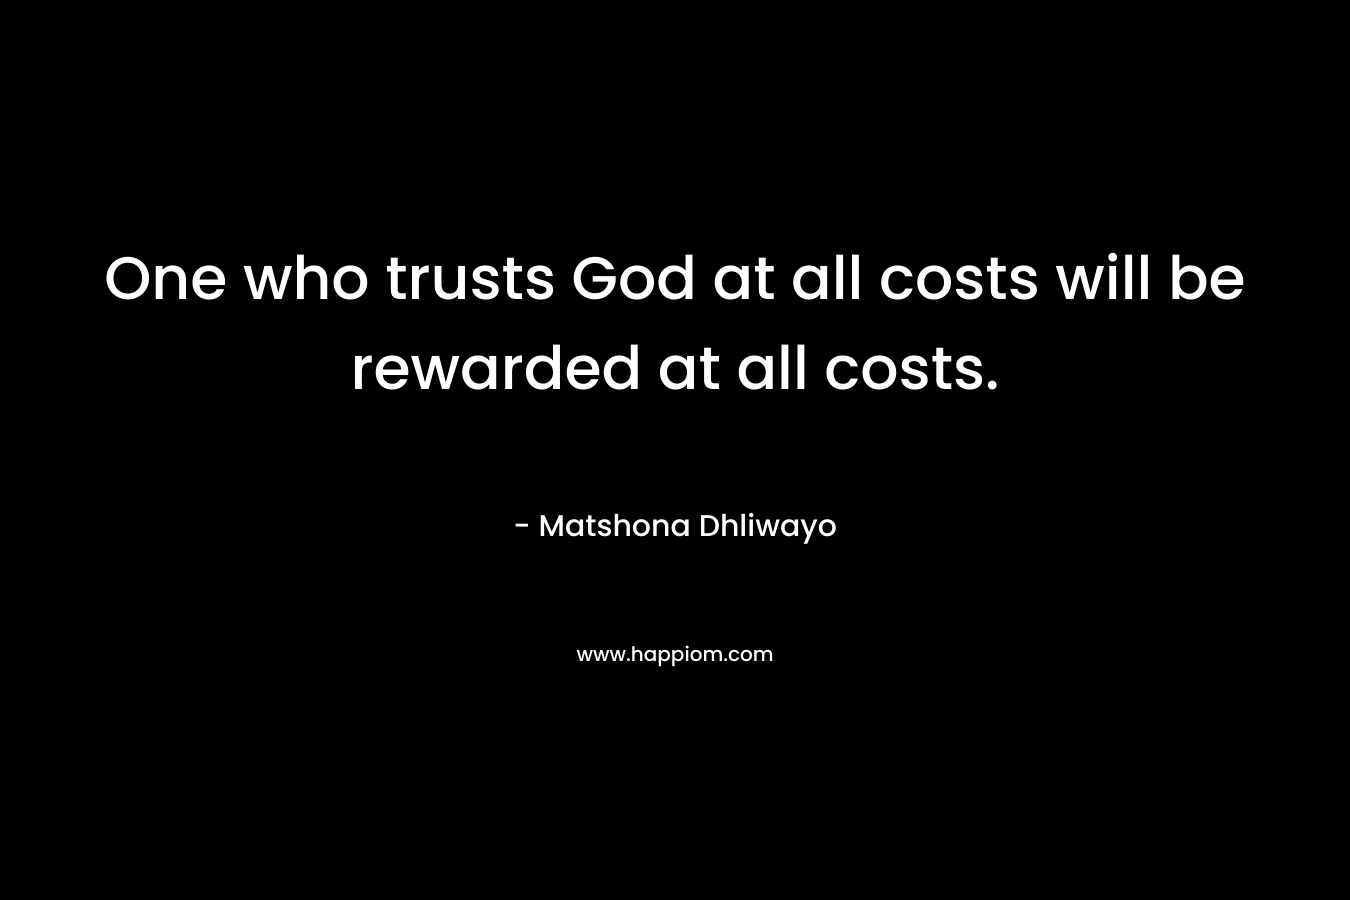 One who trusts God at all costs will be rewarded at all costs.